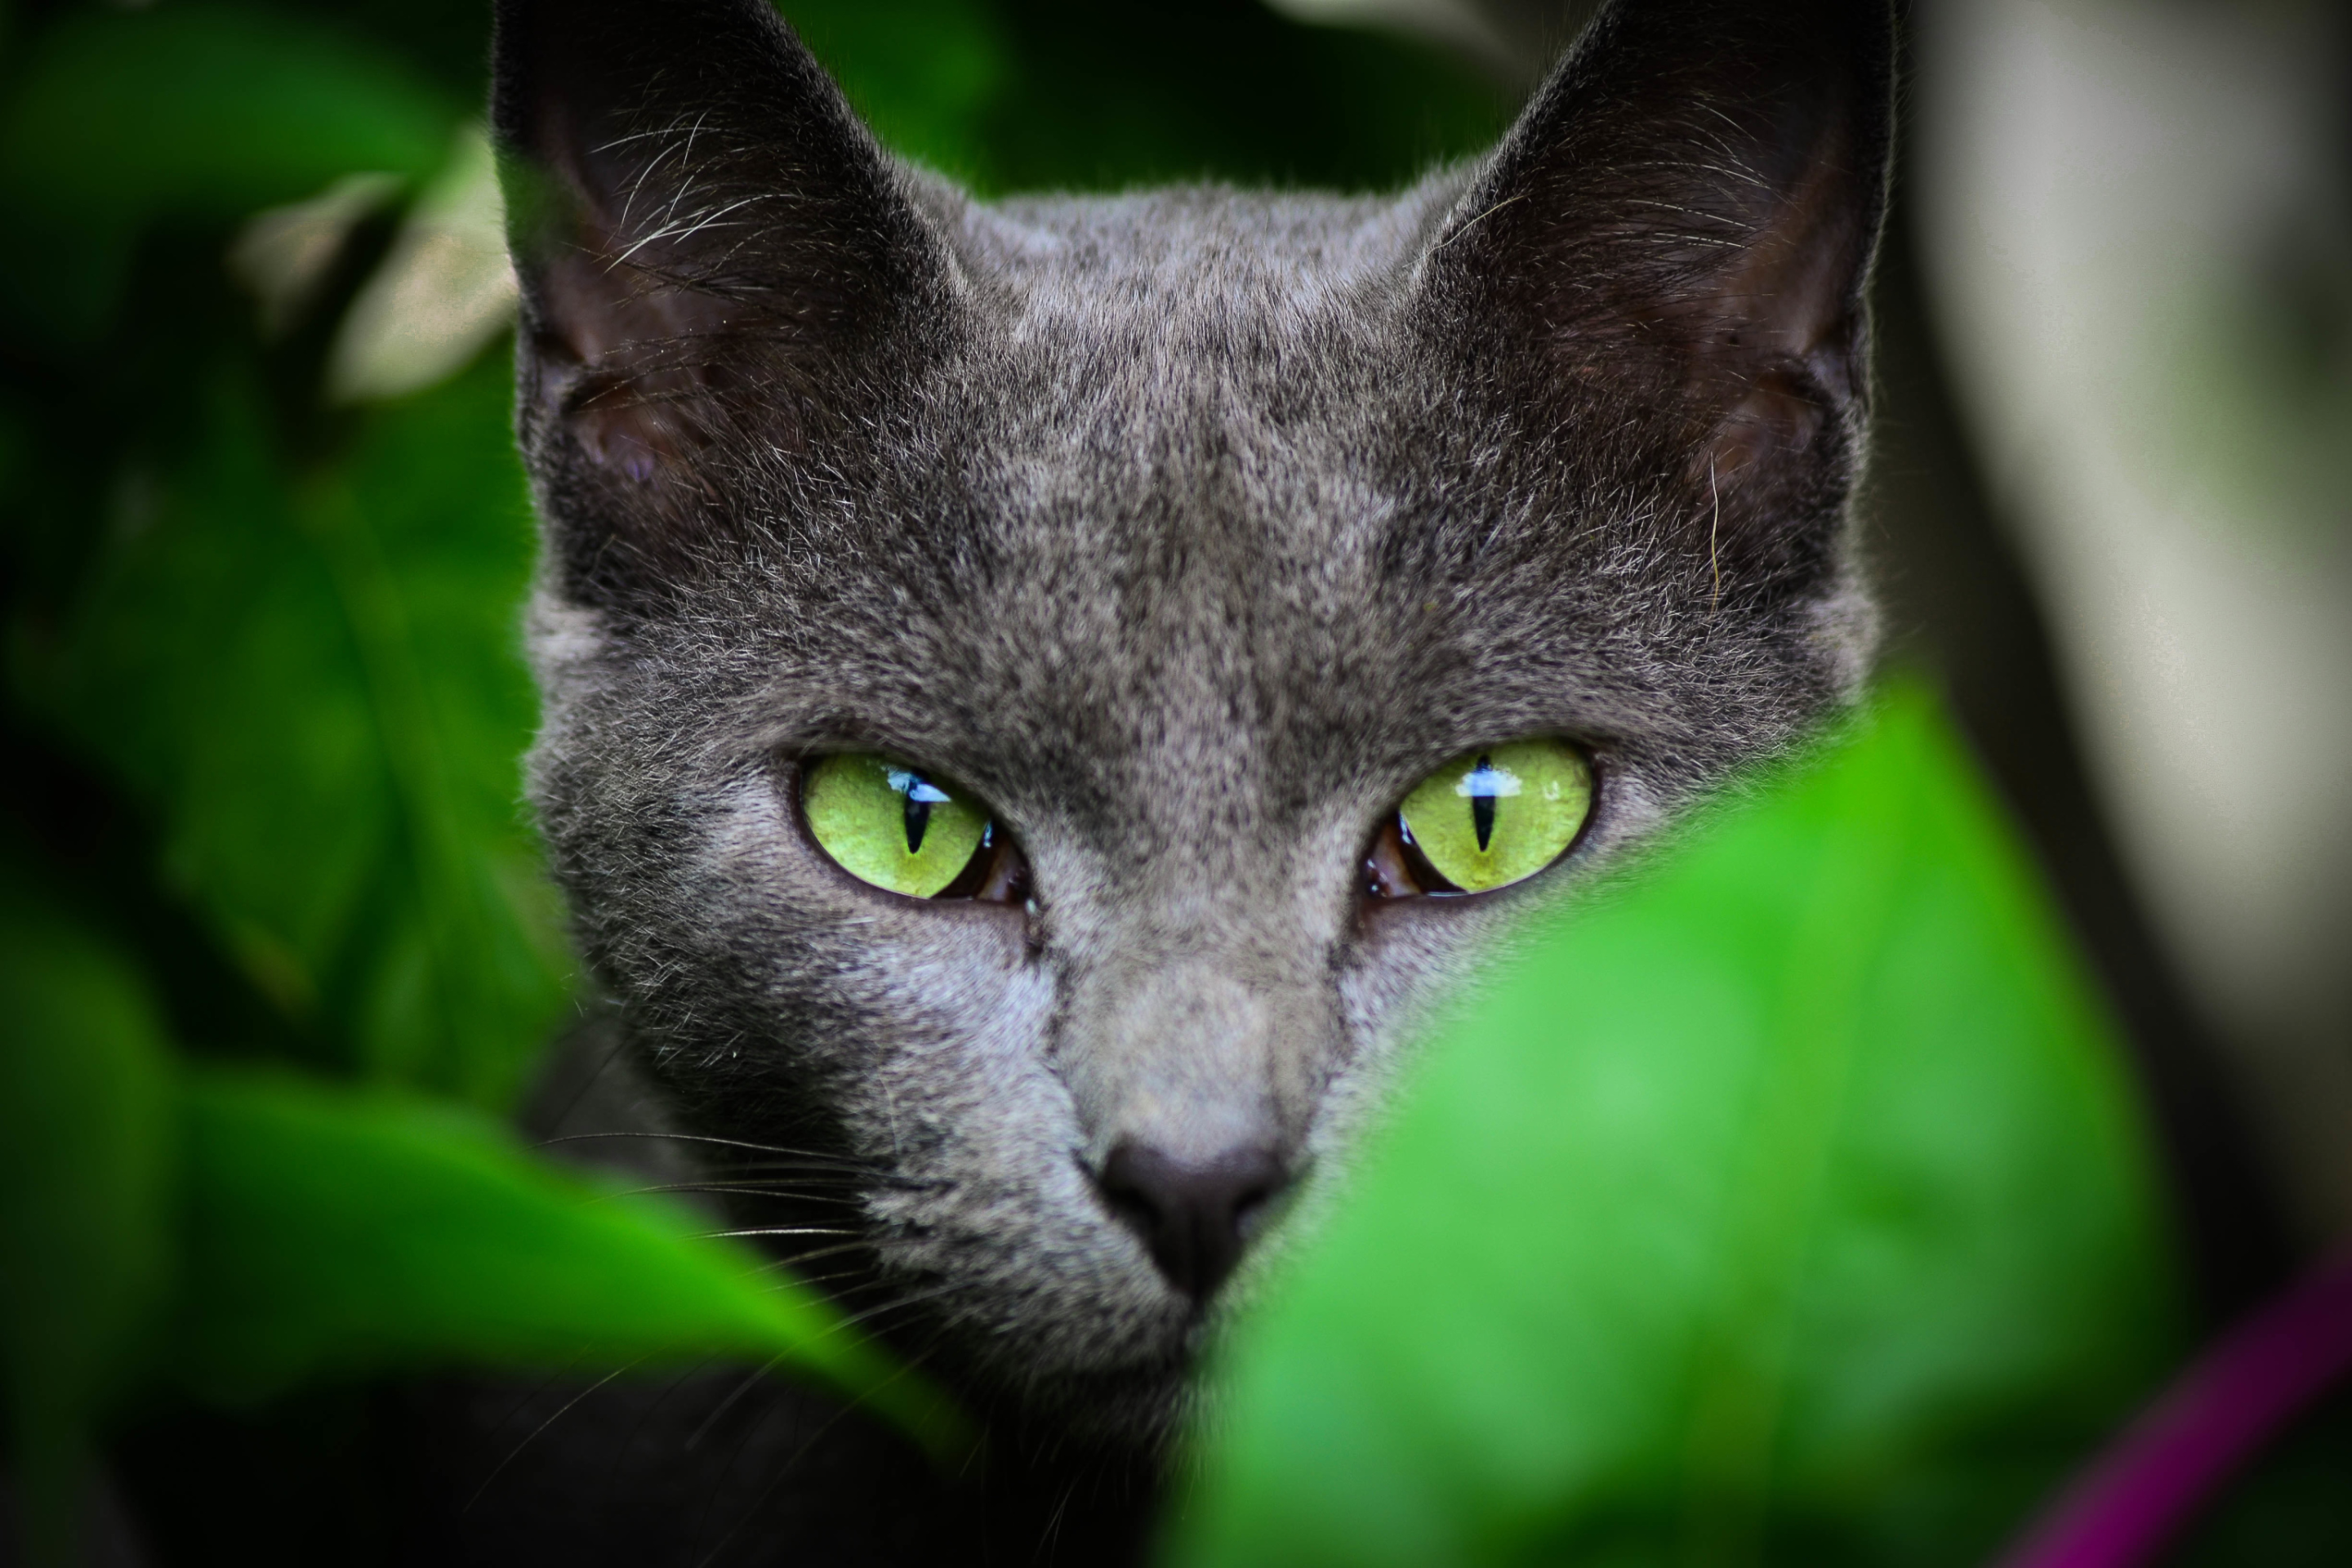 Cat With Green Eyes wallpaper 2880x1920